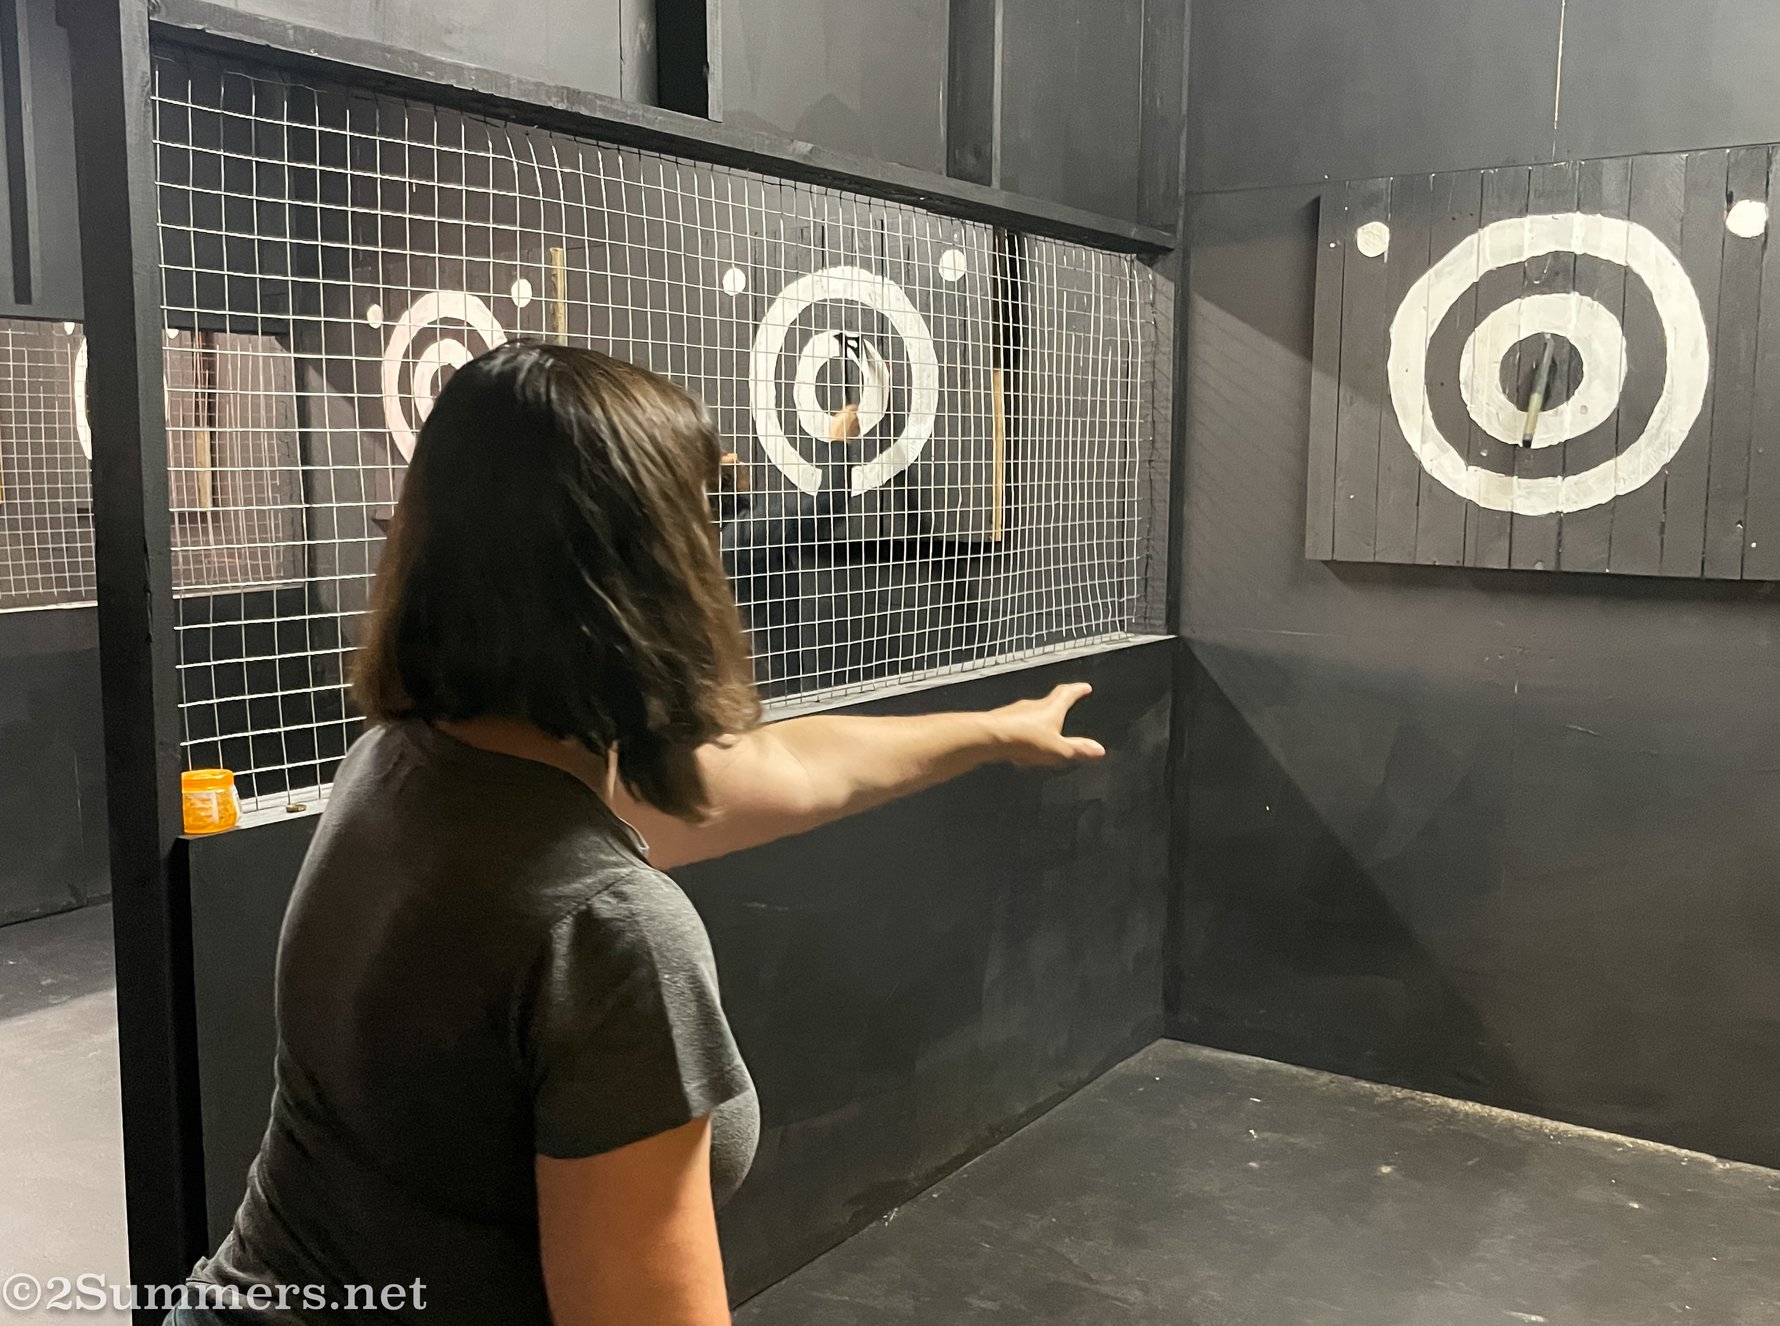 Axe-throwing. Photo: @2summers.net